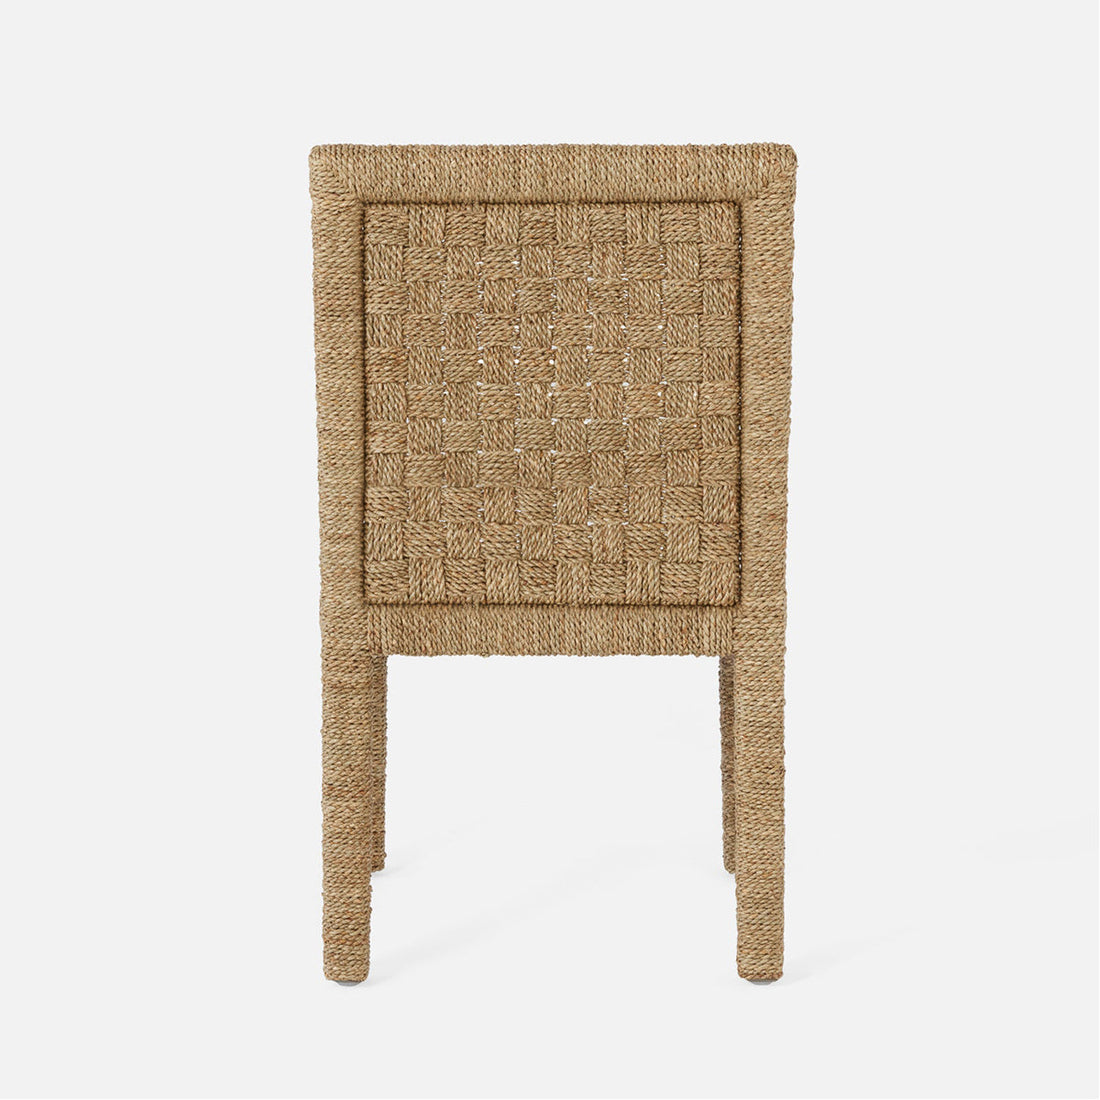 Made Goods Hayes Dining Chair in Nile Fabric